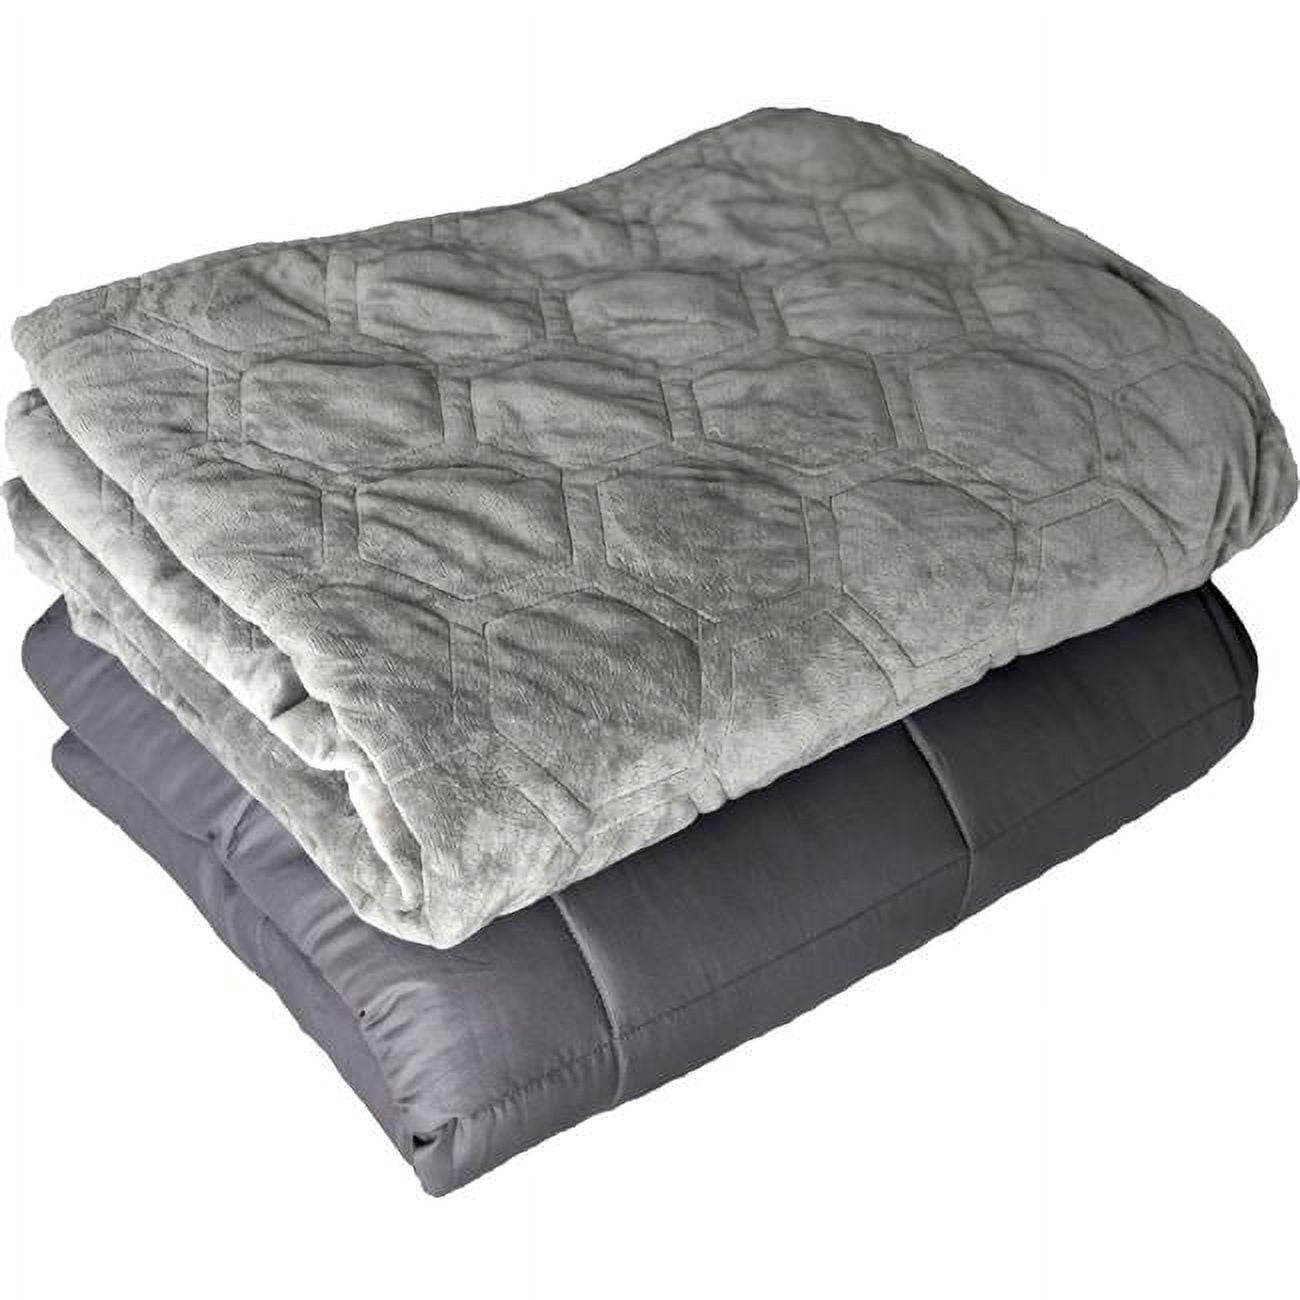 Dcwb4872-15-hc-ws 48 X 72 In. 15 Lbs Weighted Blanket With Duvet Cover - Gray